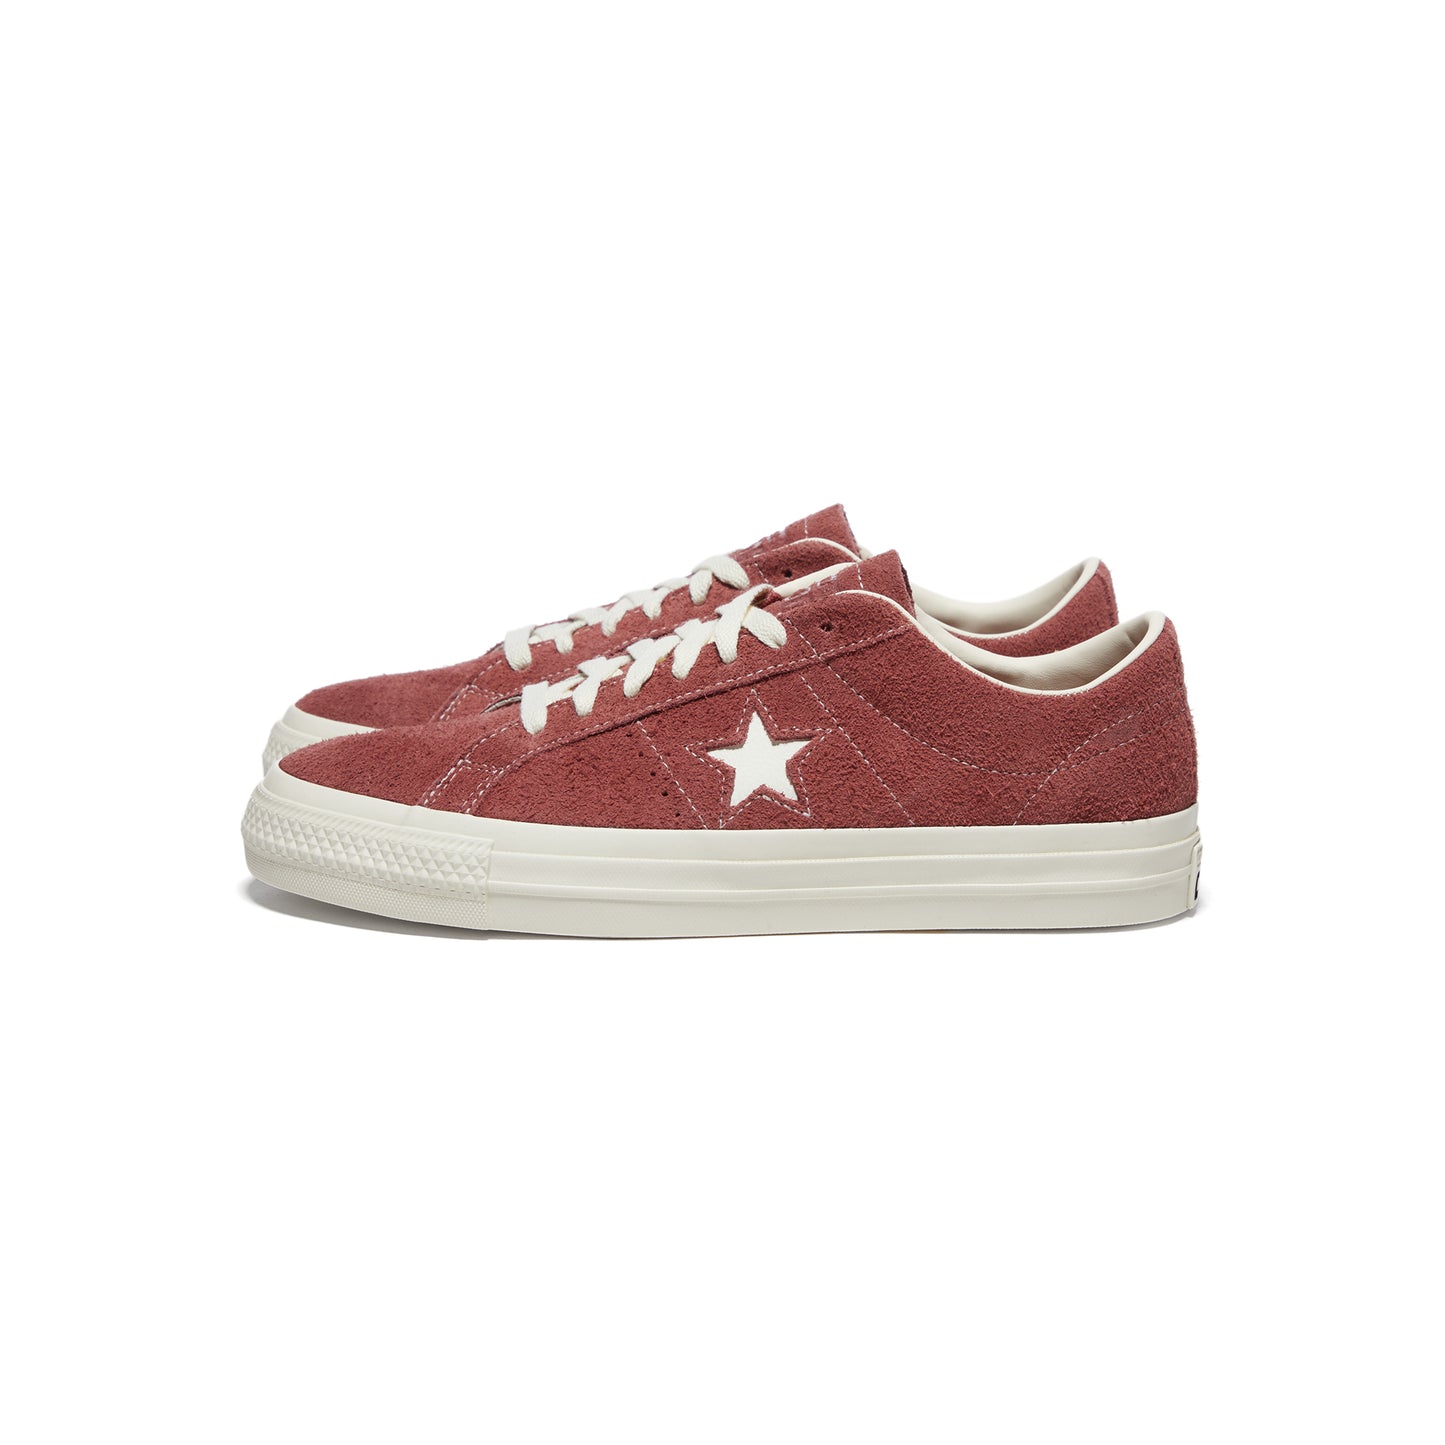 Converse One Star Pro OX (Cave Shadow/Egret)